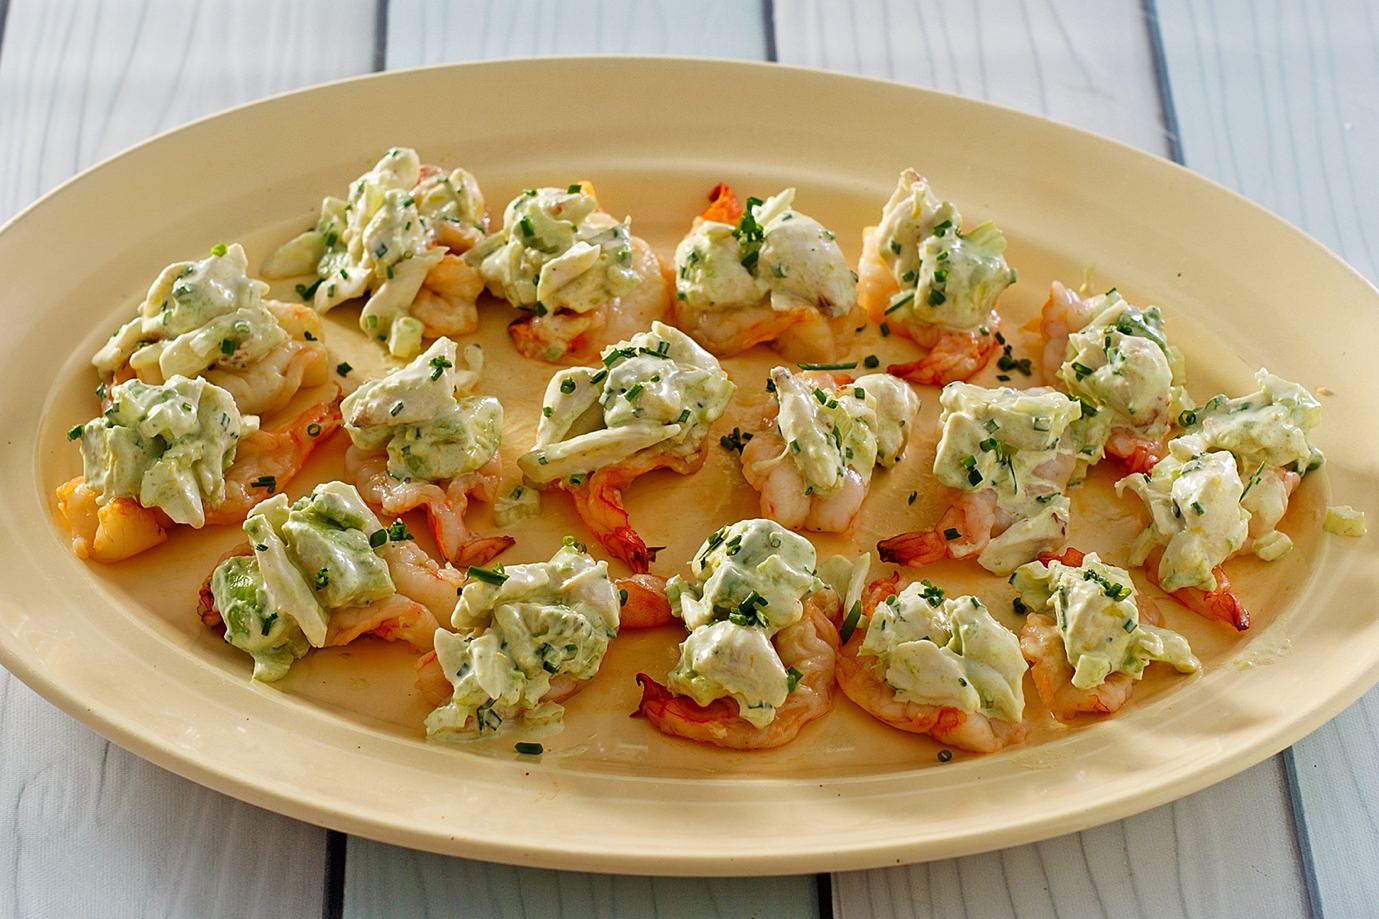 Butterflied Shrimp Topped with Avocado Crab Salad from the Beefer